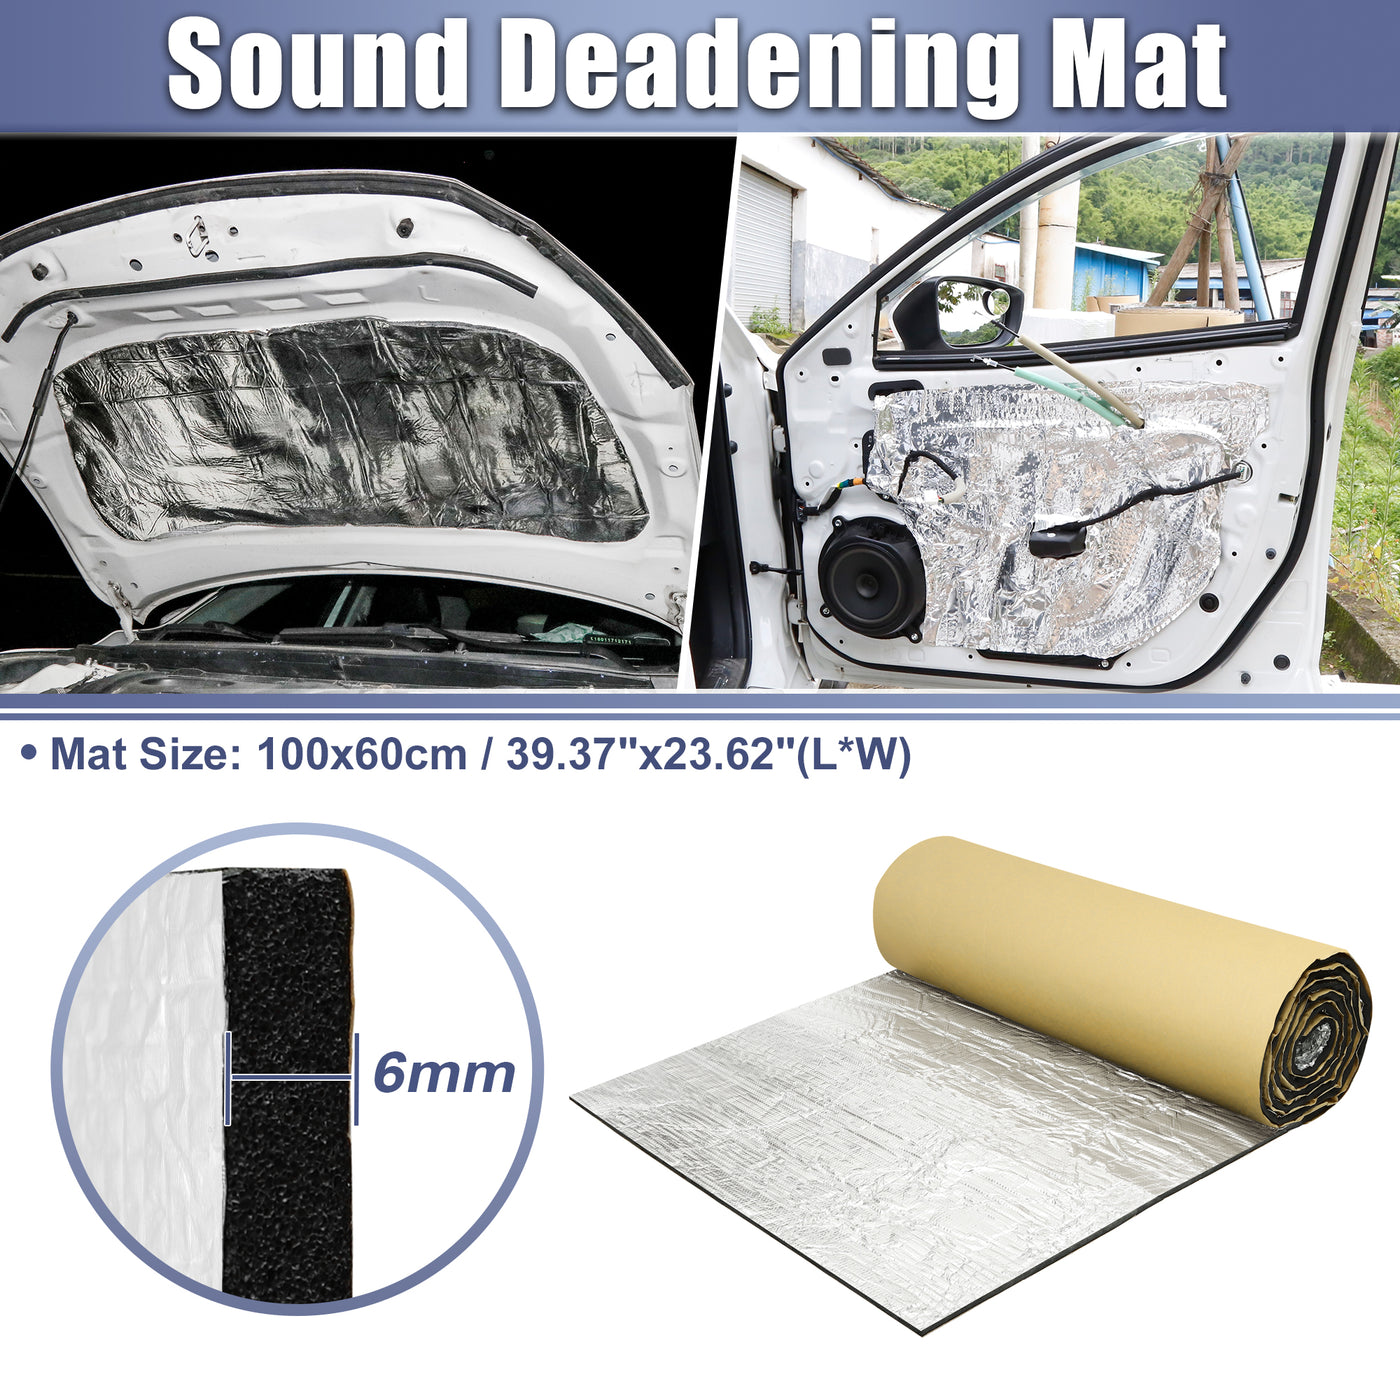 X AUTOHAUX 236mil 6mm 6.45sqft Car Sound Deadening Mat Aluminum Closed Cell Foam Heat Shield Material Damping Self Adhesive Universal for Hood Fender and Boat Engine Cover 39.37"x23.62"